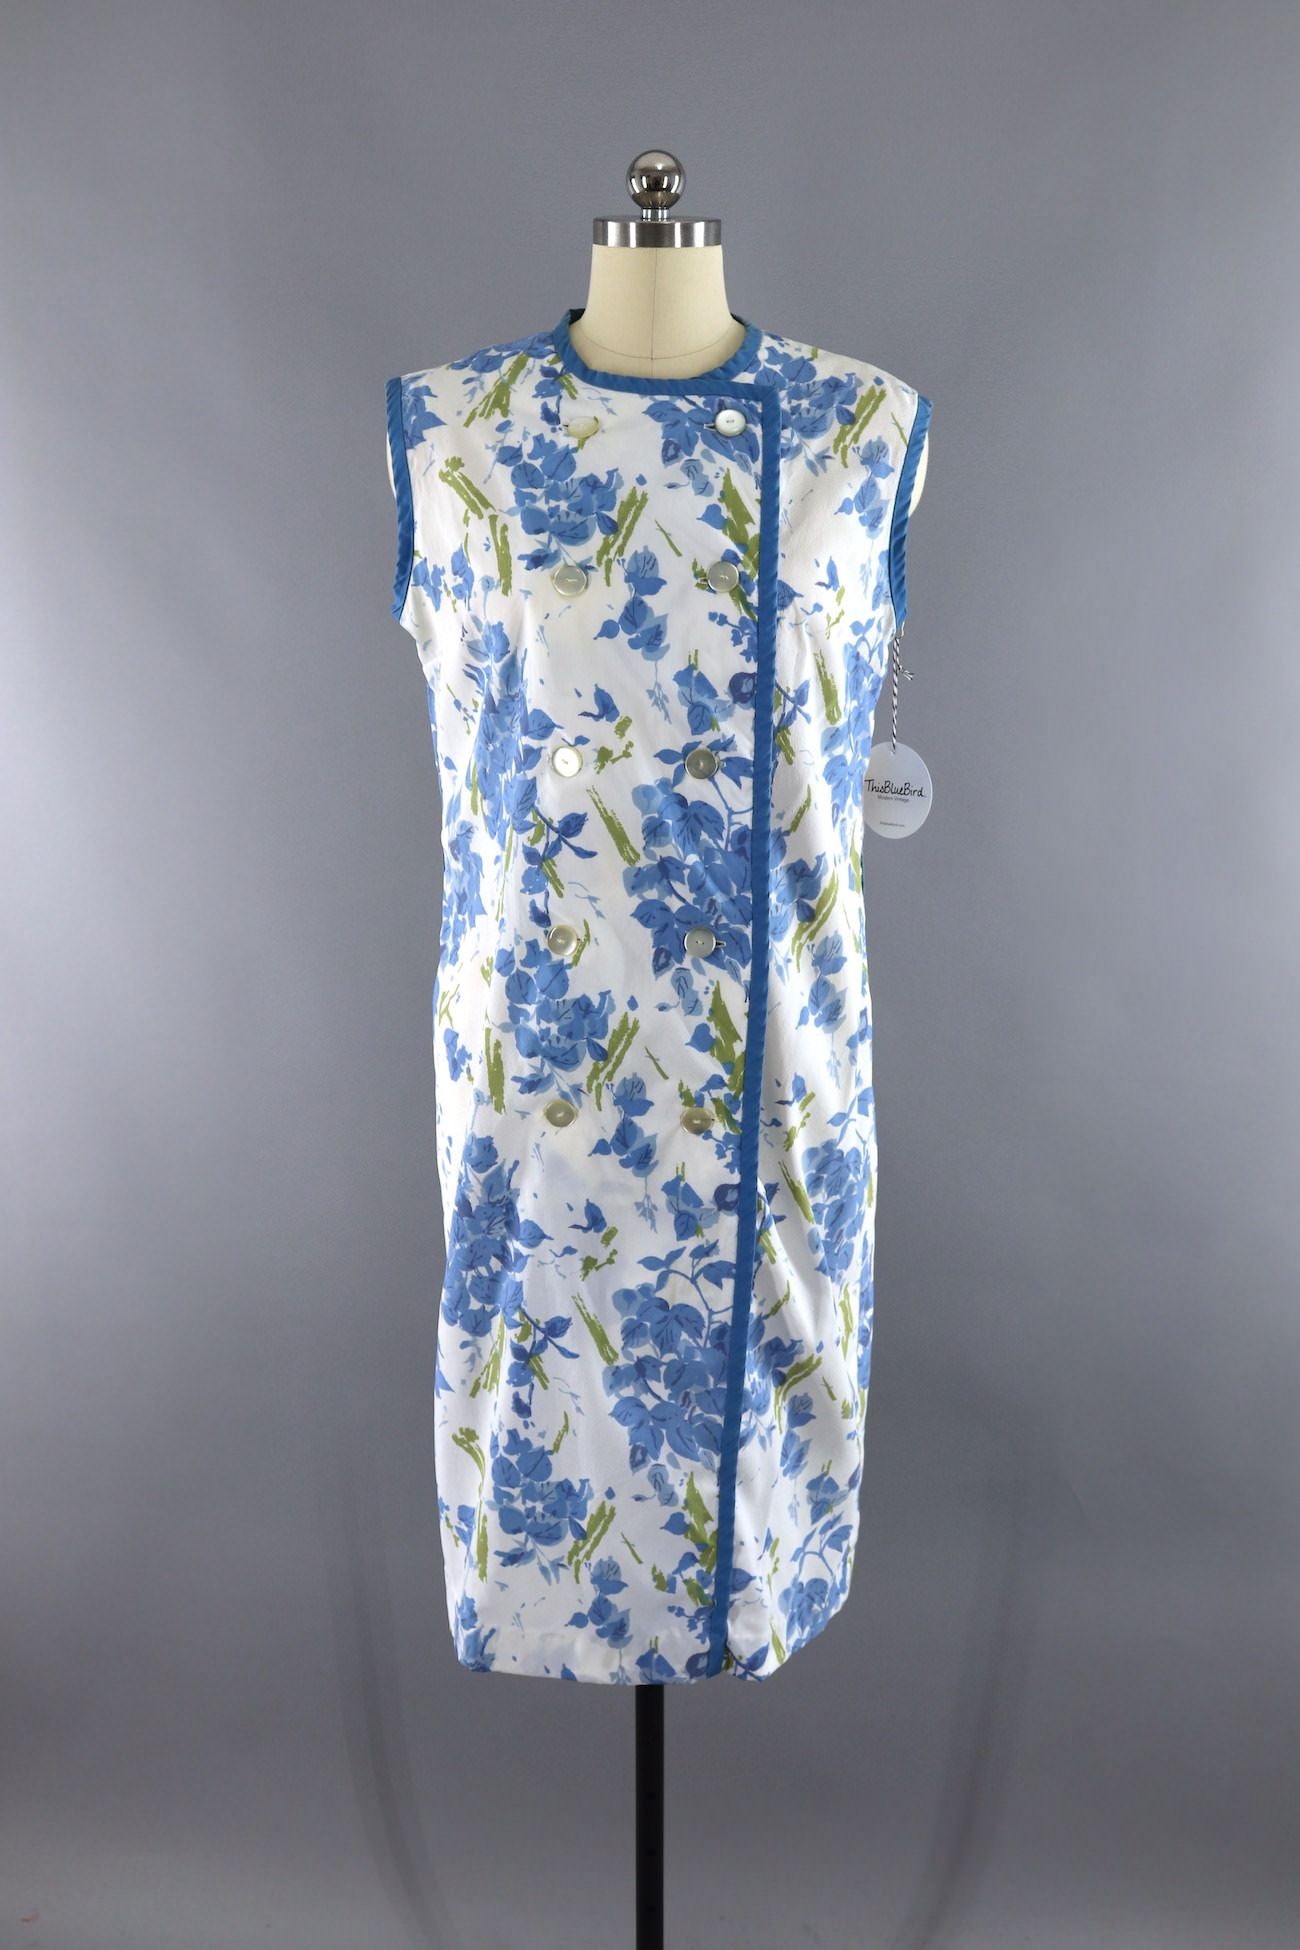 Vintage White and Blue Floral Print Summer Dress - ThisBlueBird